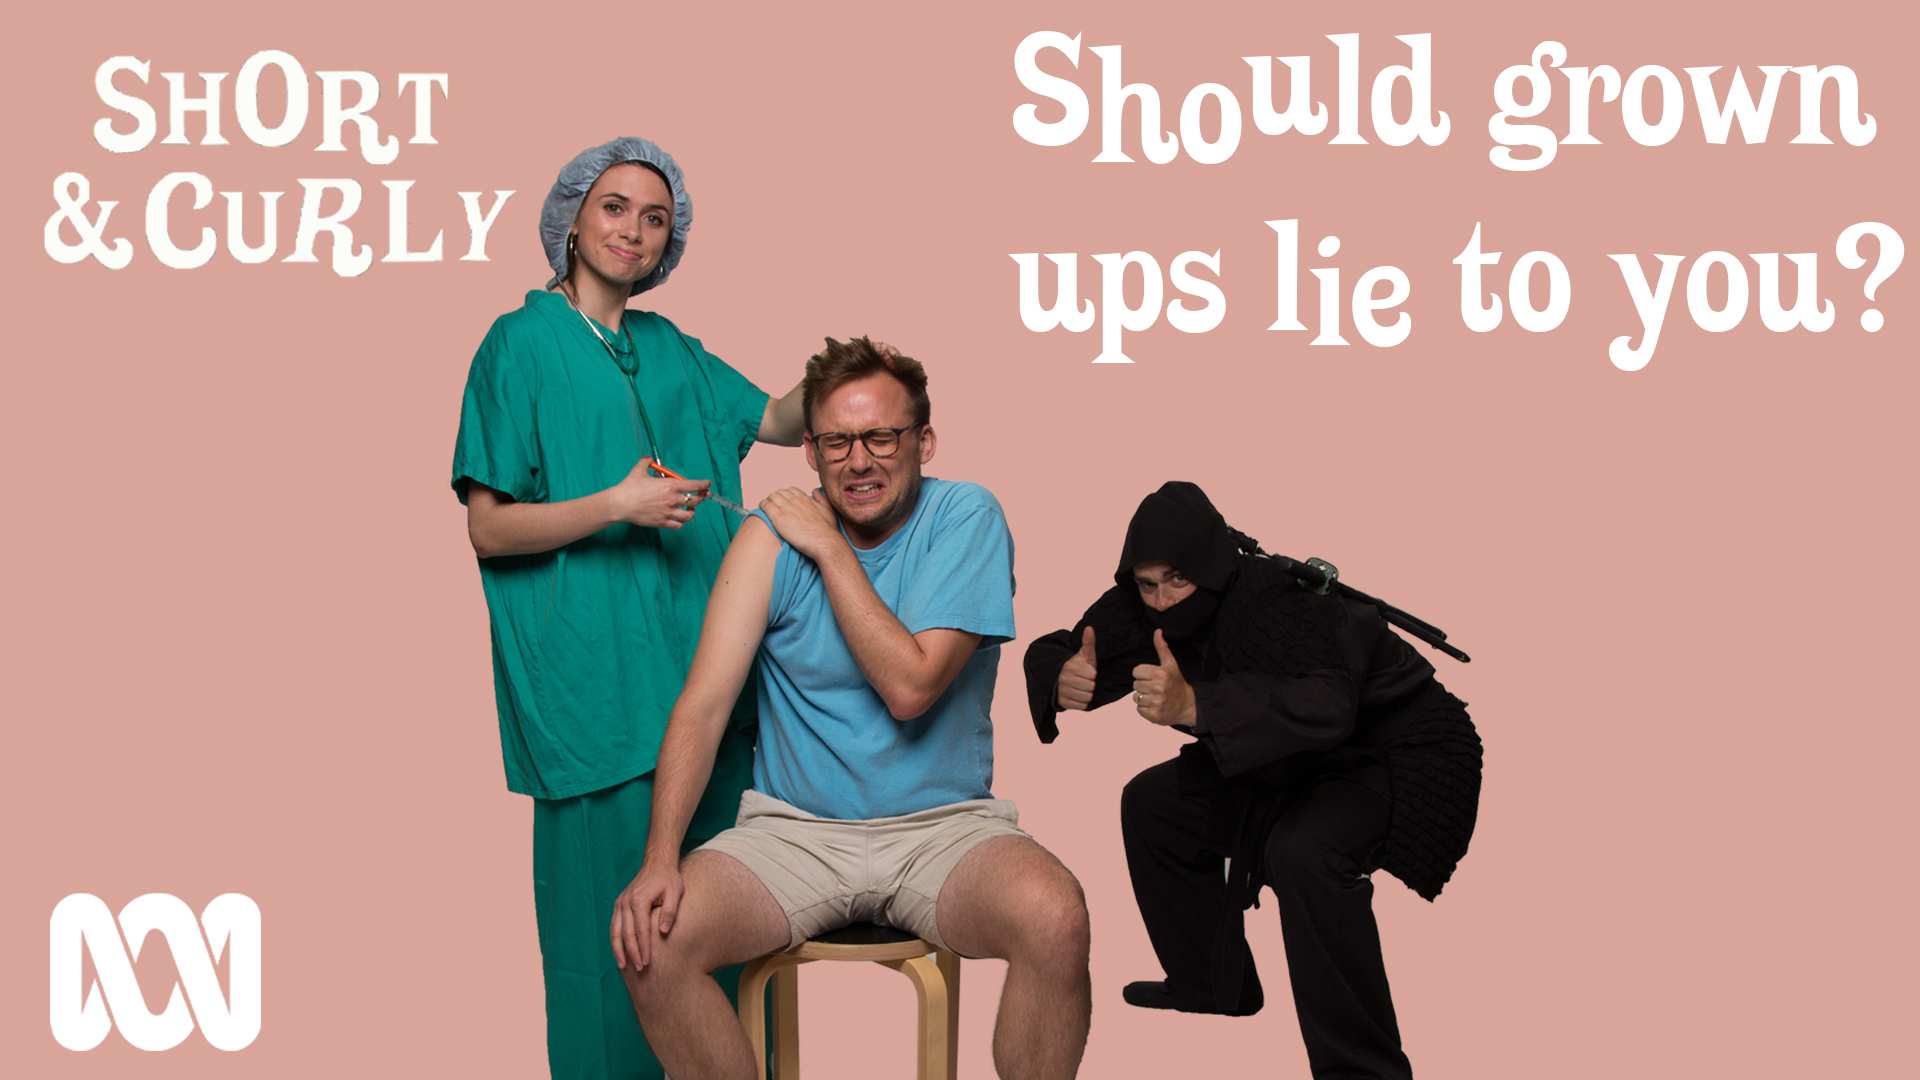 Should grown-ups lie to you?